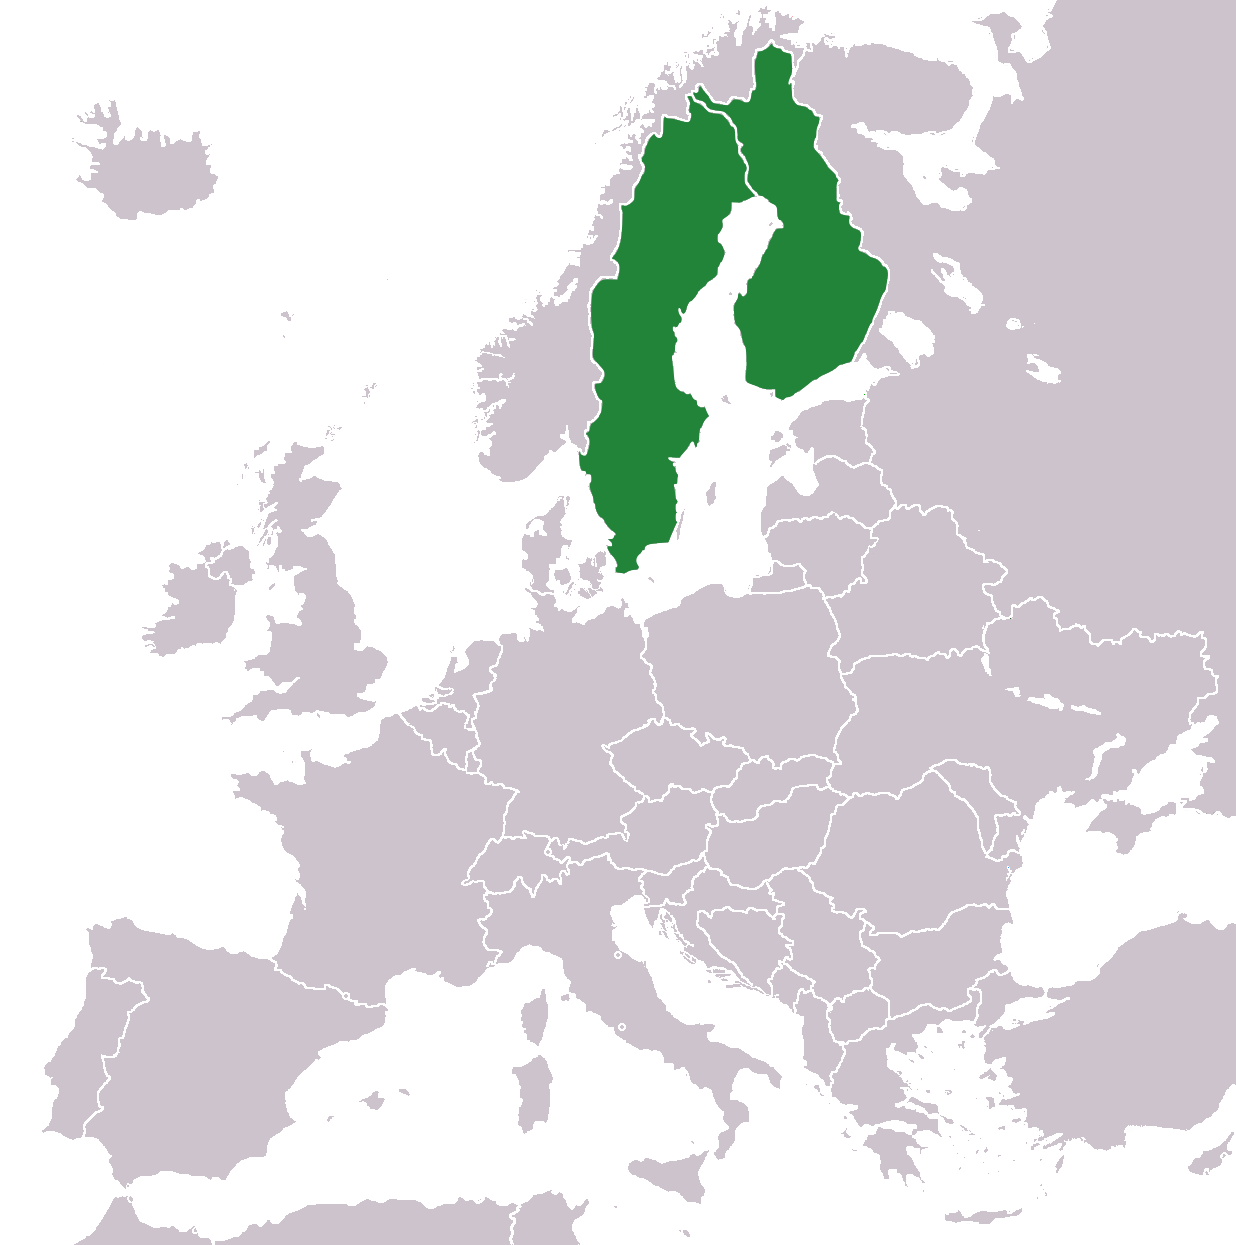 File:Finland and Sweden.svg - Wikimedia Commons